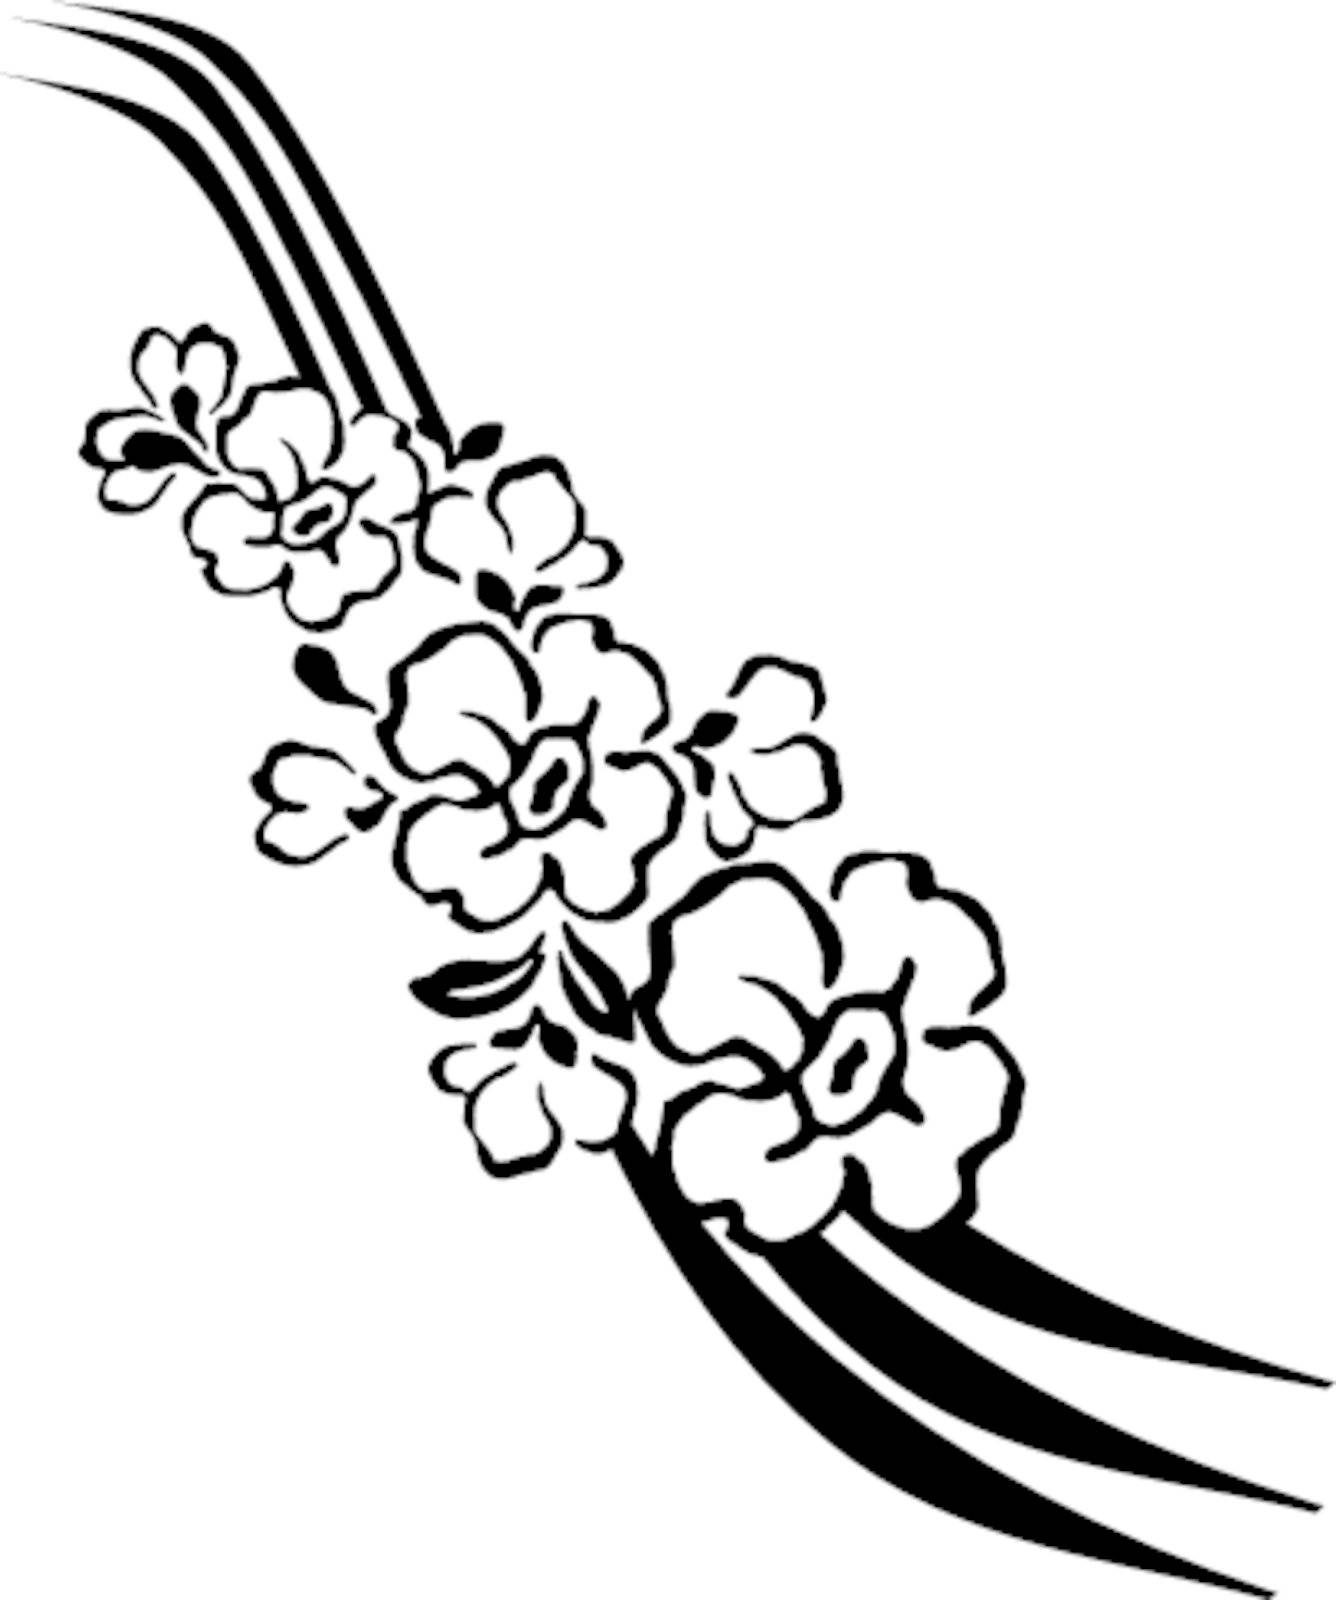 Decorative flowers in the style of tattoo. Vector illustration.